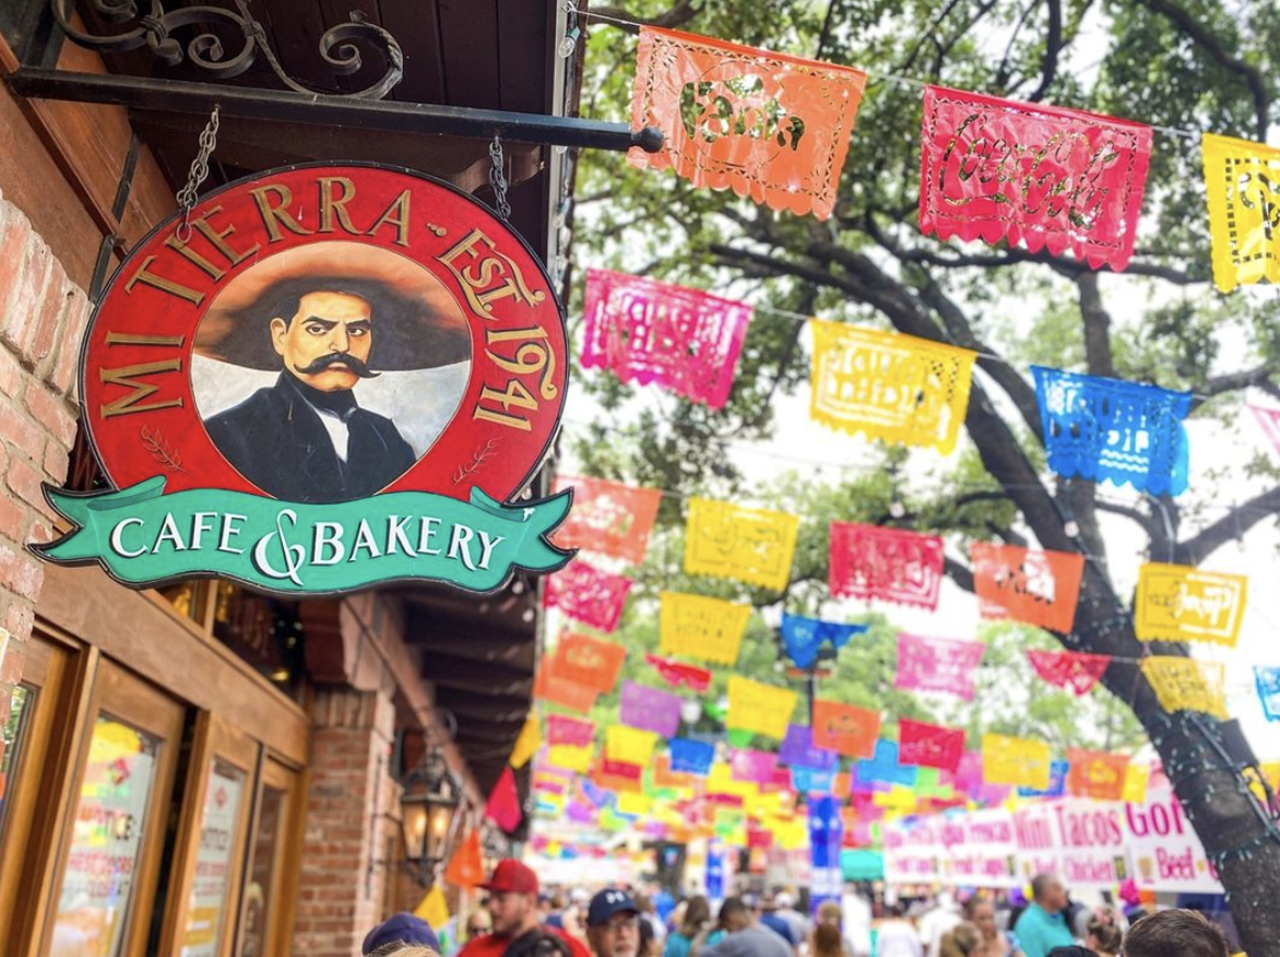 Mi Tierra, 1941
Multiple locations, mitierracafe.com
What is there to say about this local cultural gem that hasn’t already been said? The 80-year-old downtown eatery draws thousands of tourists annually, thanks to its festive decor, in-house panaderia and Tex-mex flair.
Photo via Instagram / mitierracafesa